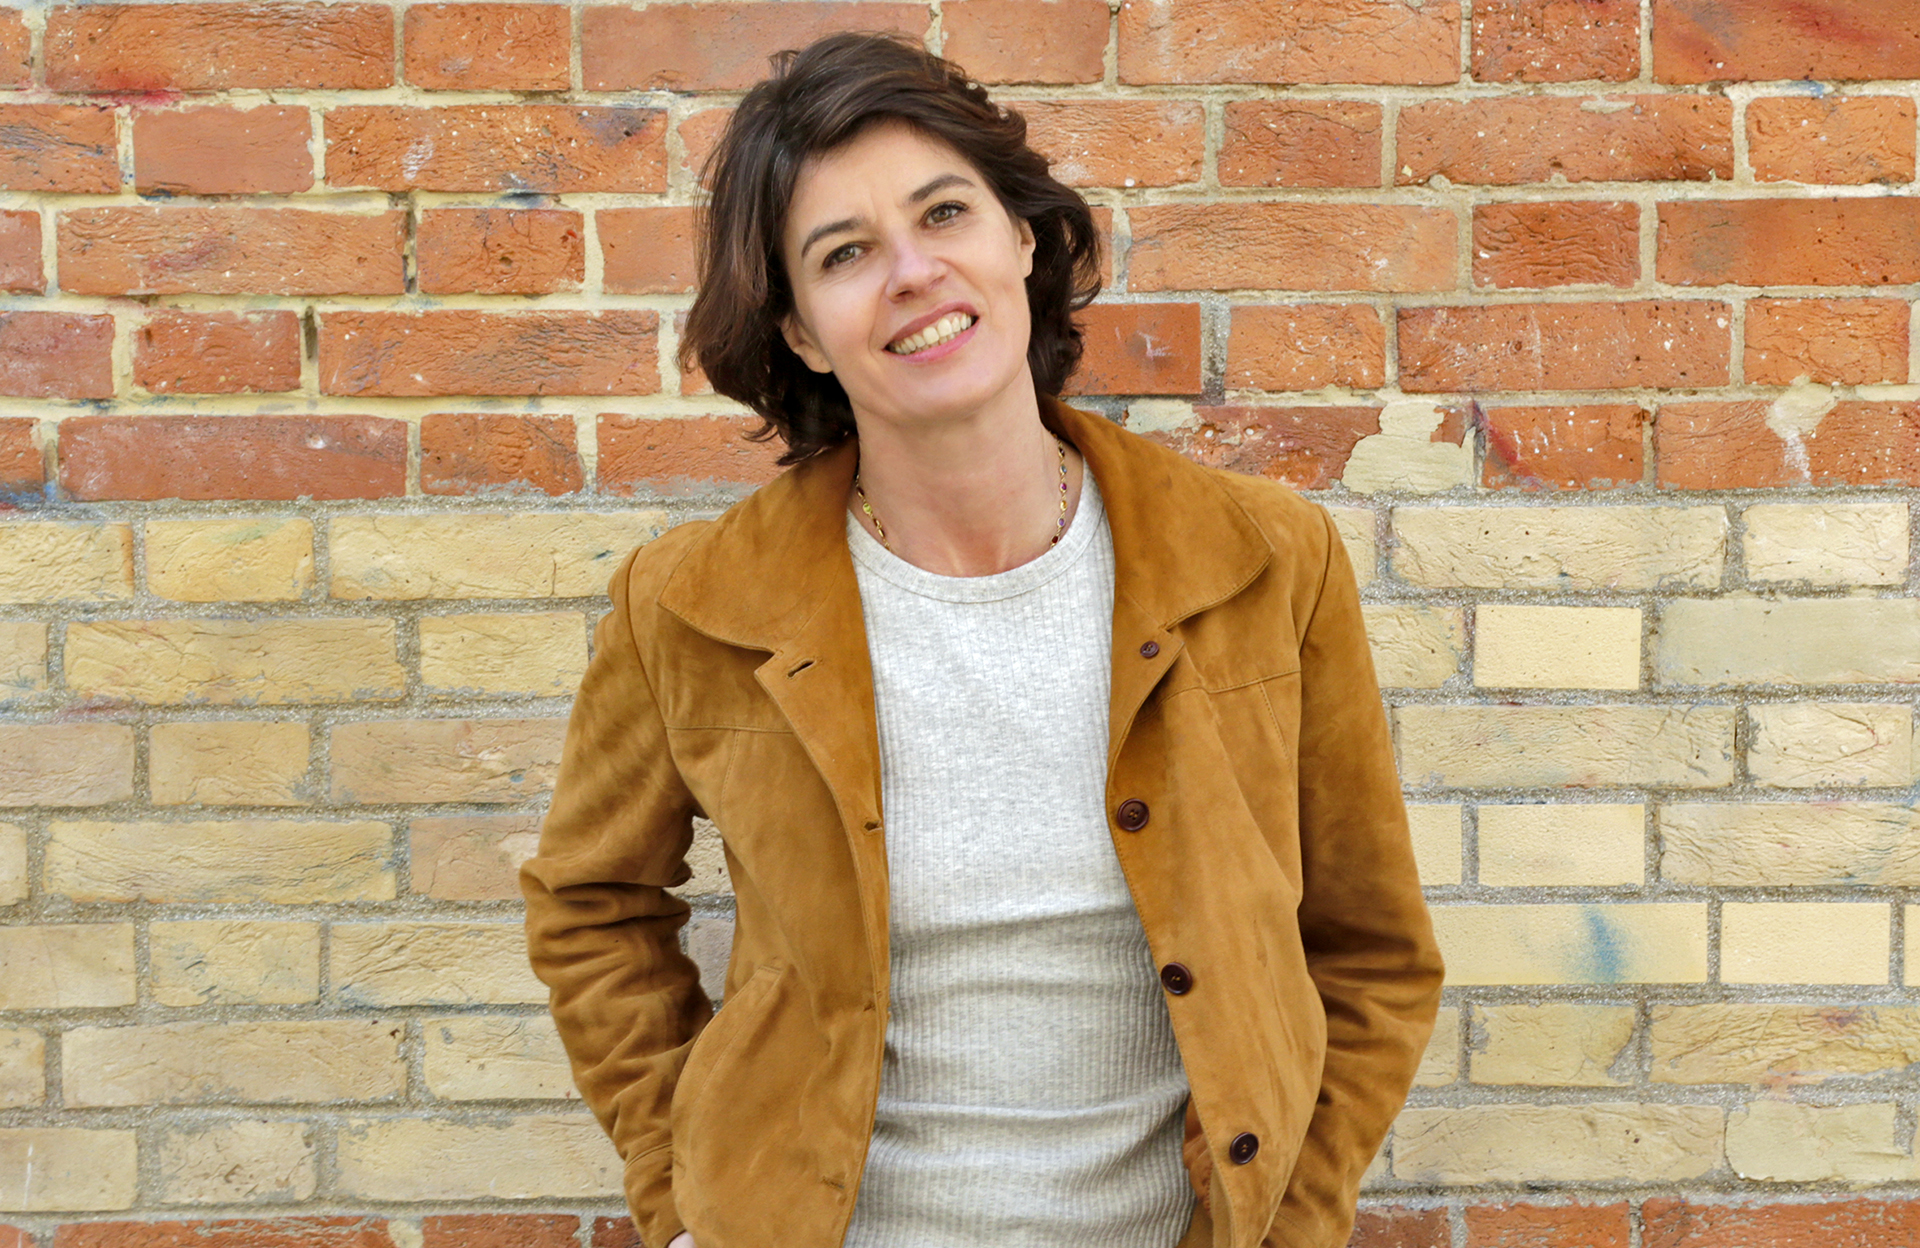 Which reader are you, Irene Jacob?  - She